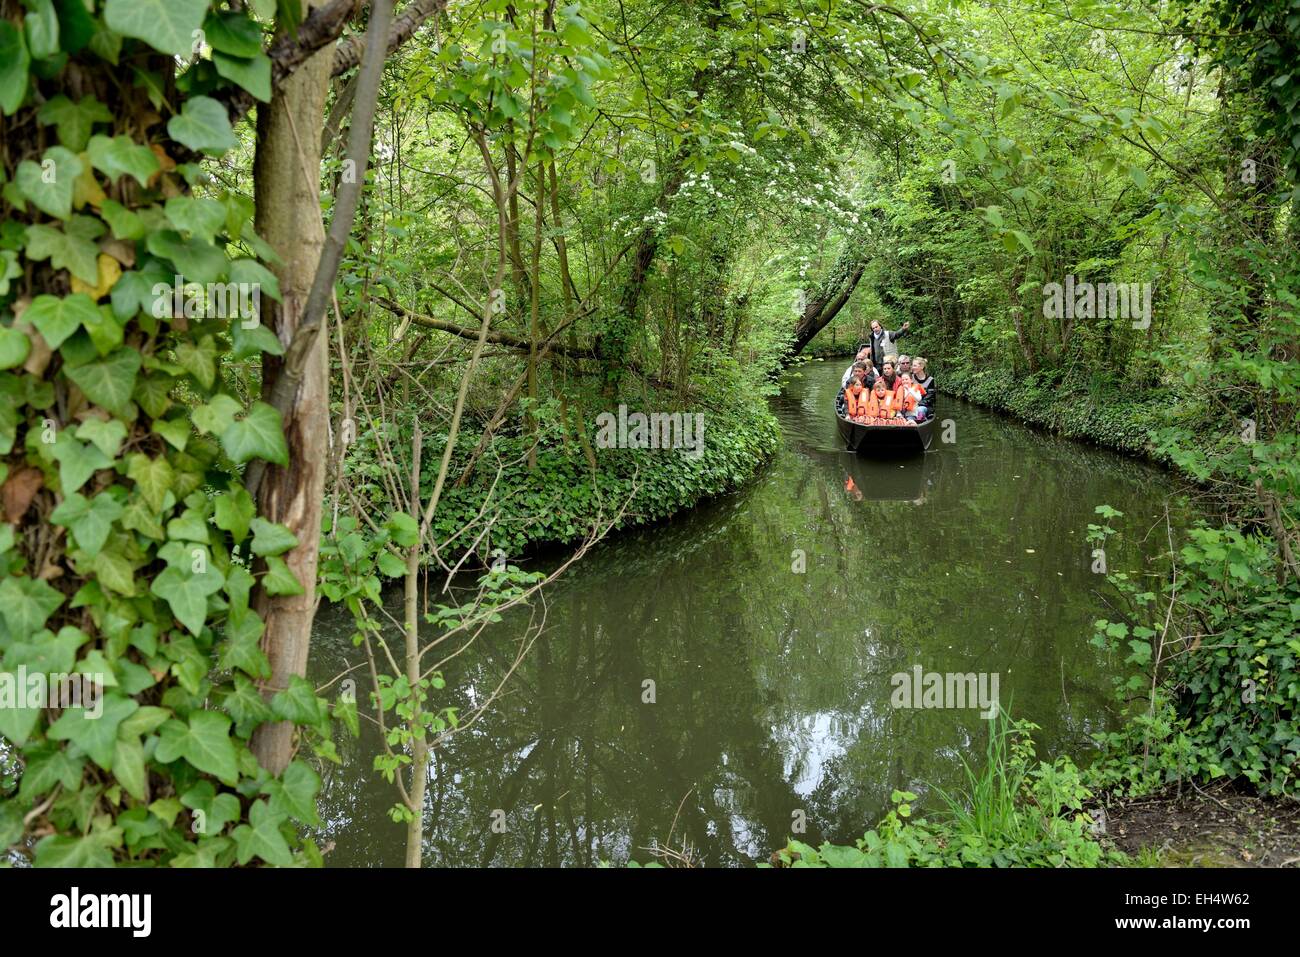 France, Somme, Amiens, the Hortillonnages, floating gardens, horn boat tour Stock Photo